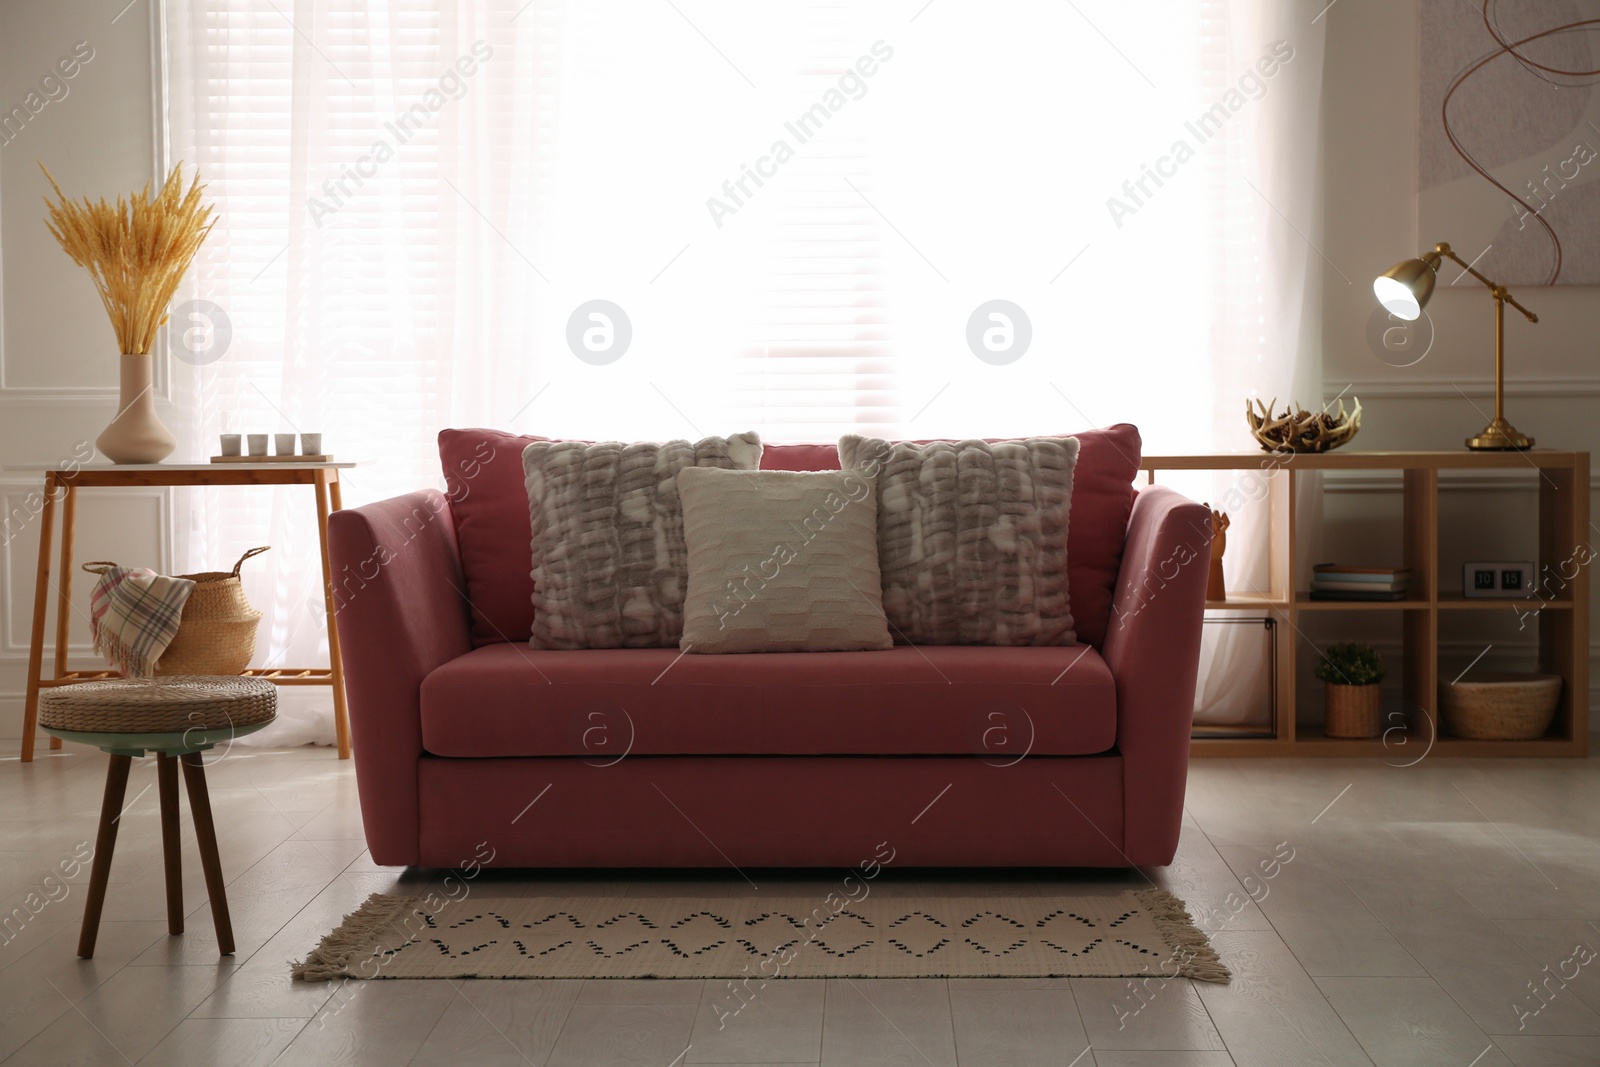 Photo of Stylish living room interior with comfortable red sofa and cushions